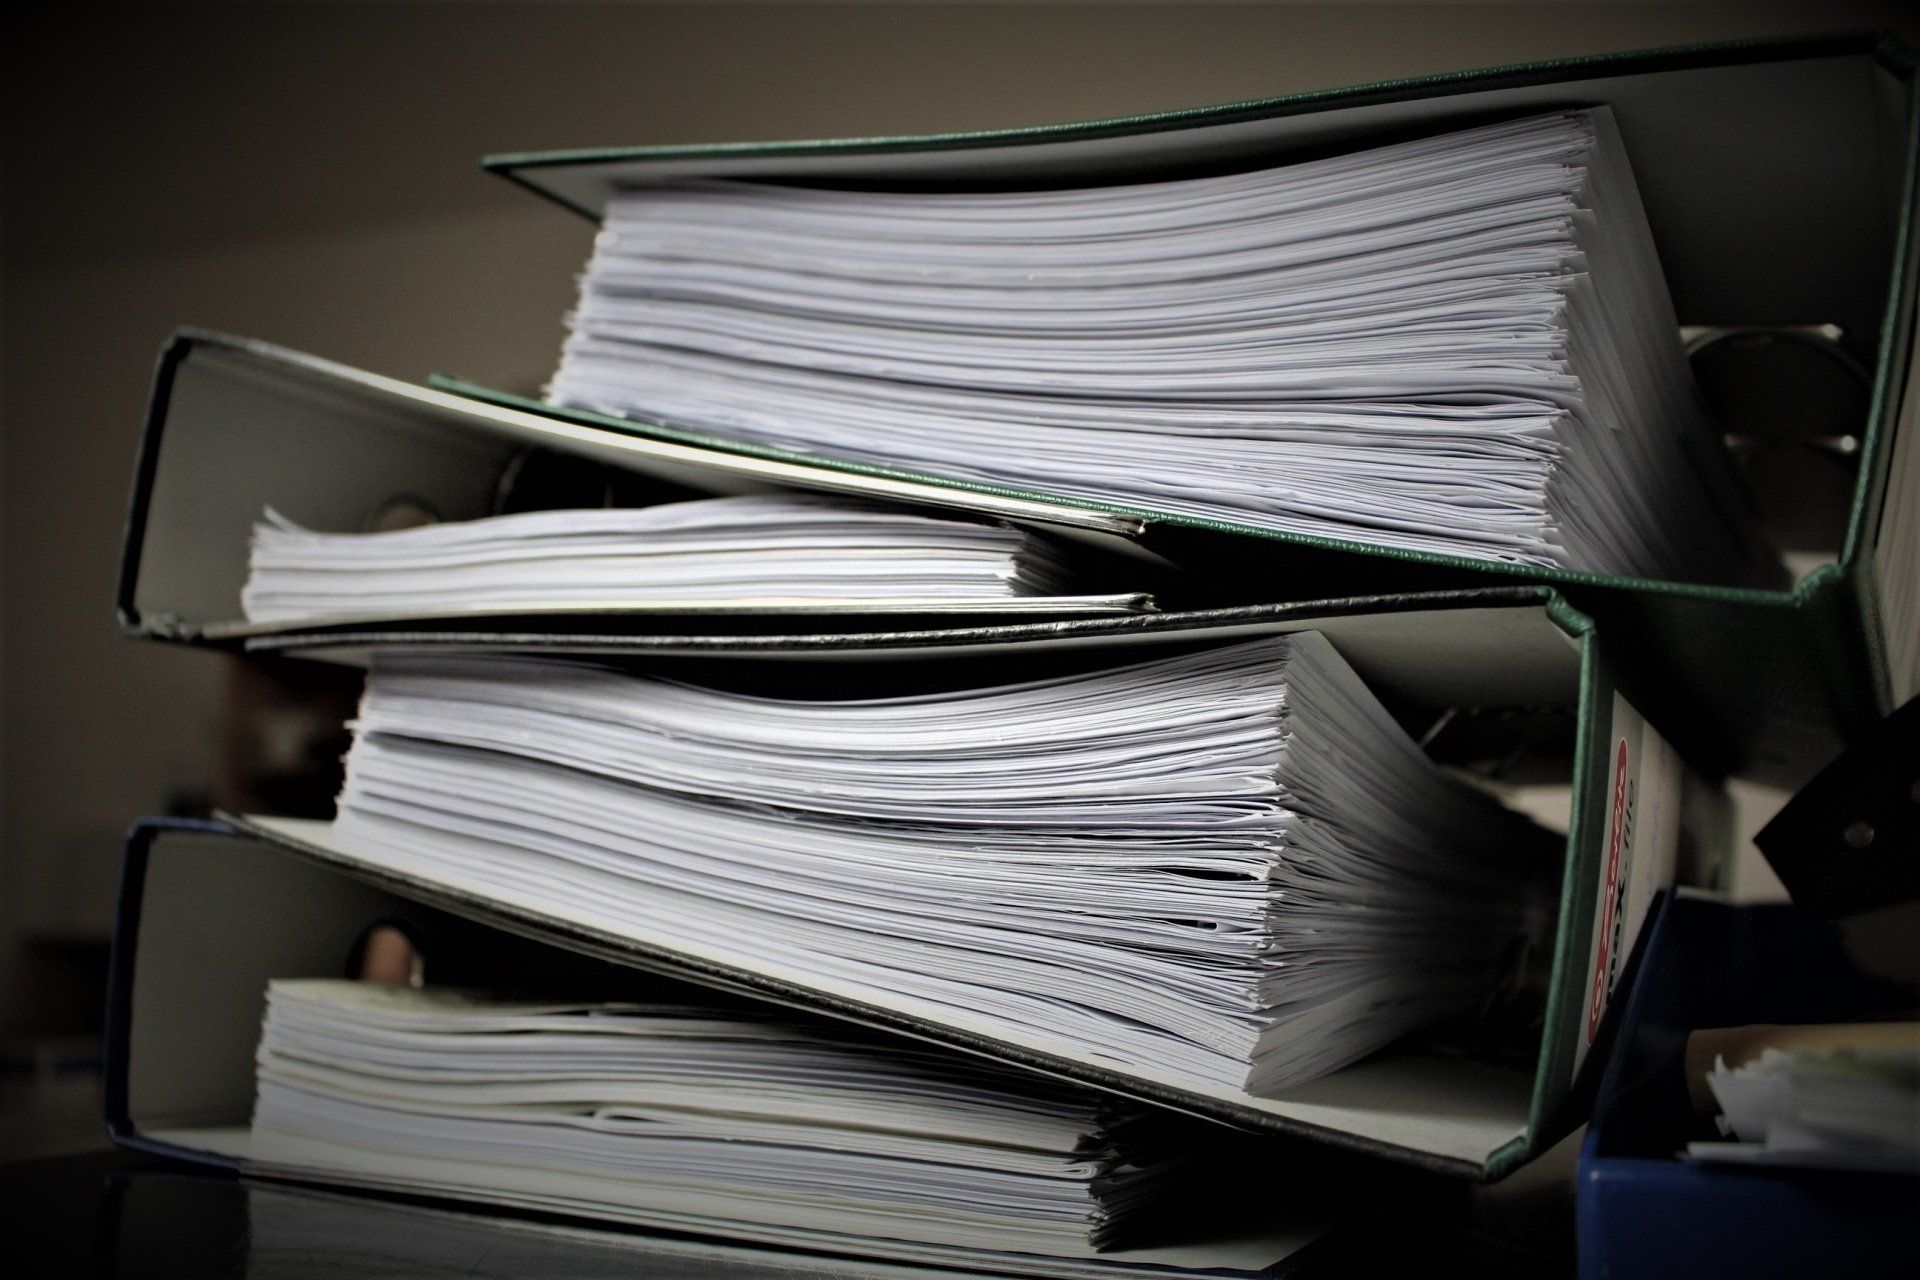 Stack of four large binders filled with numerous pages, hinting at potentially sensitive or personal documents.